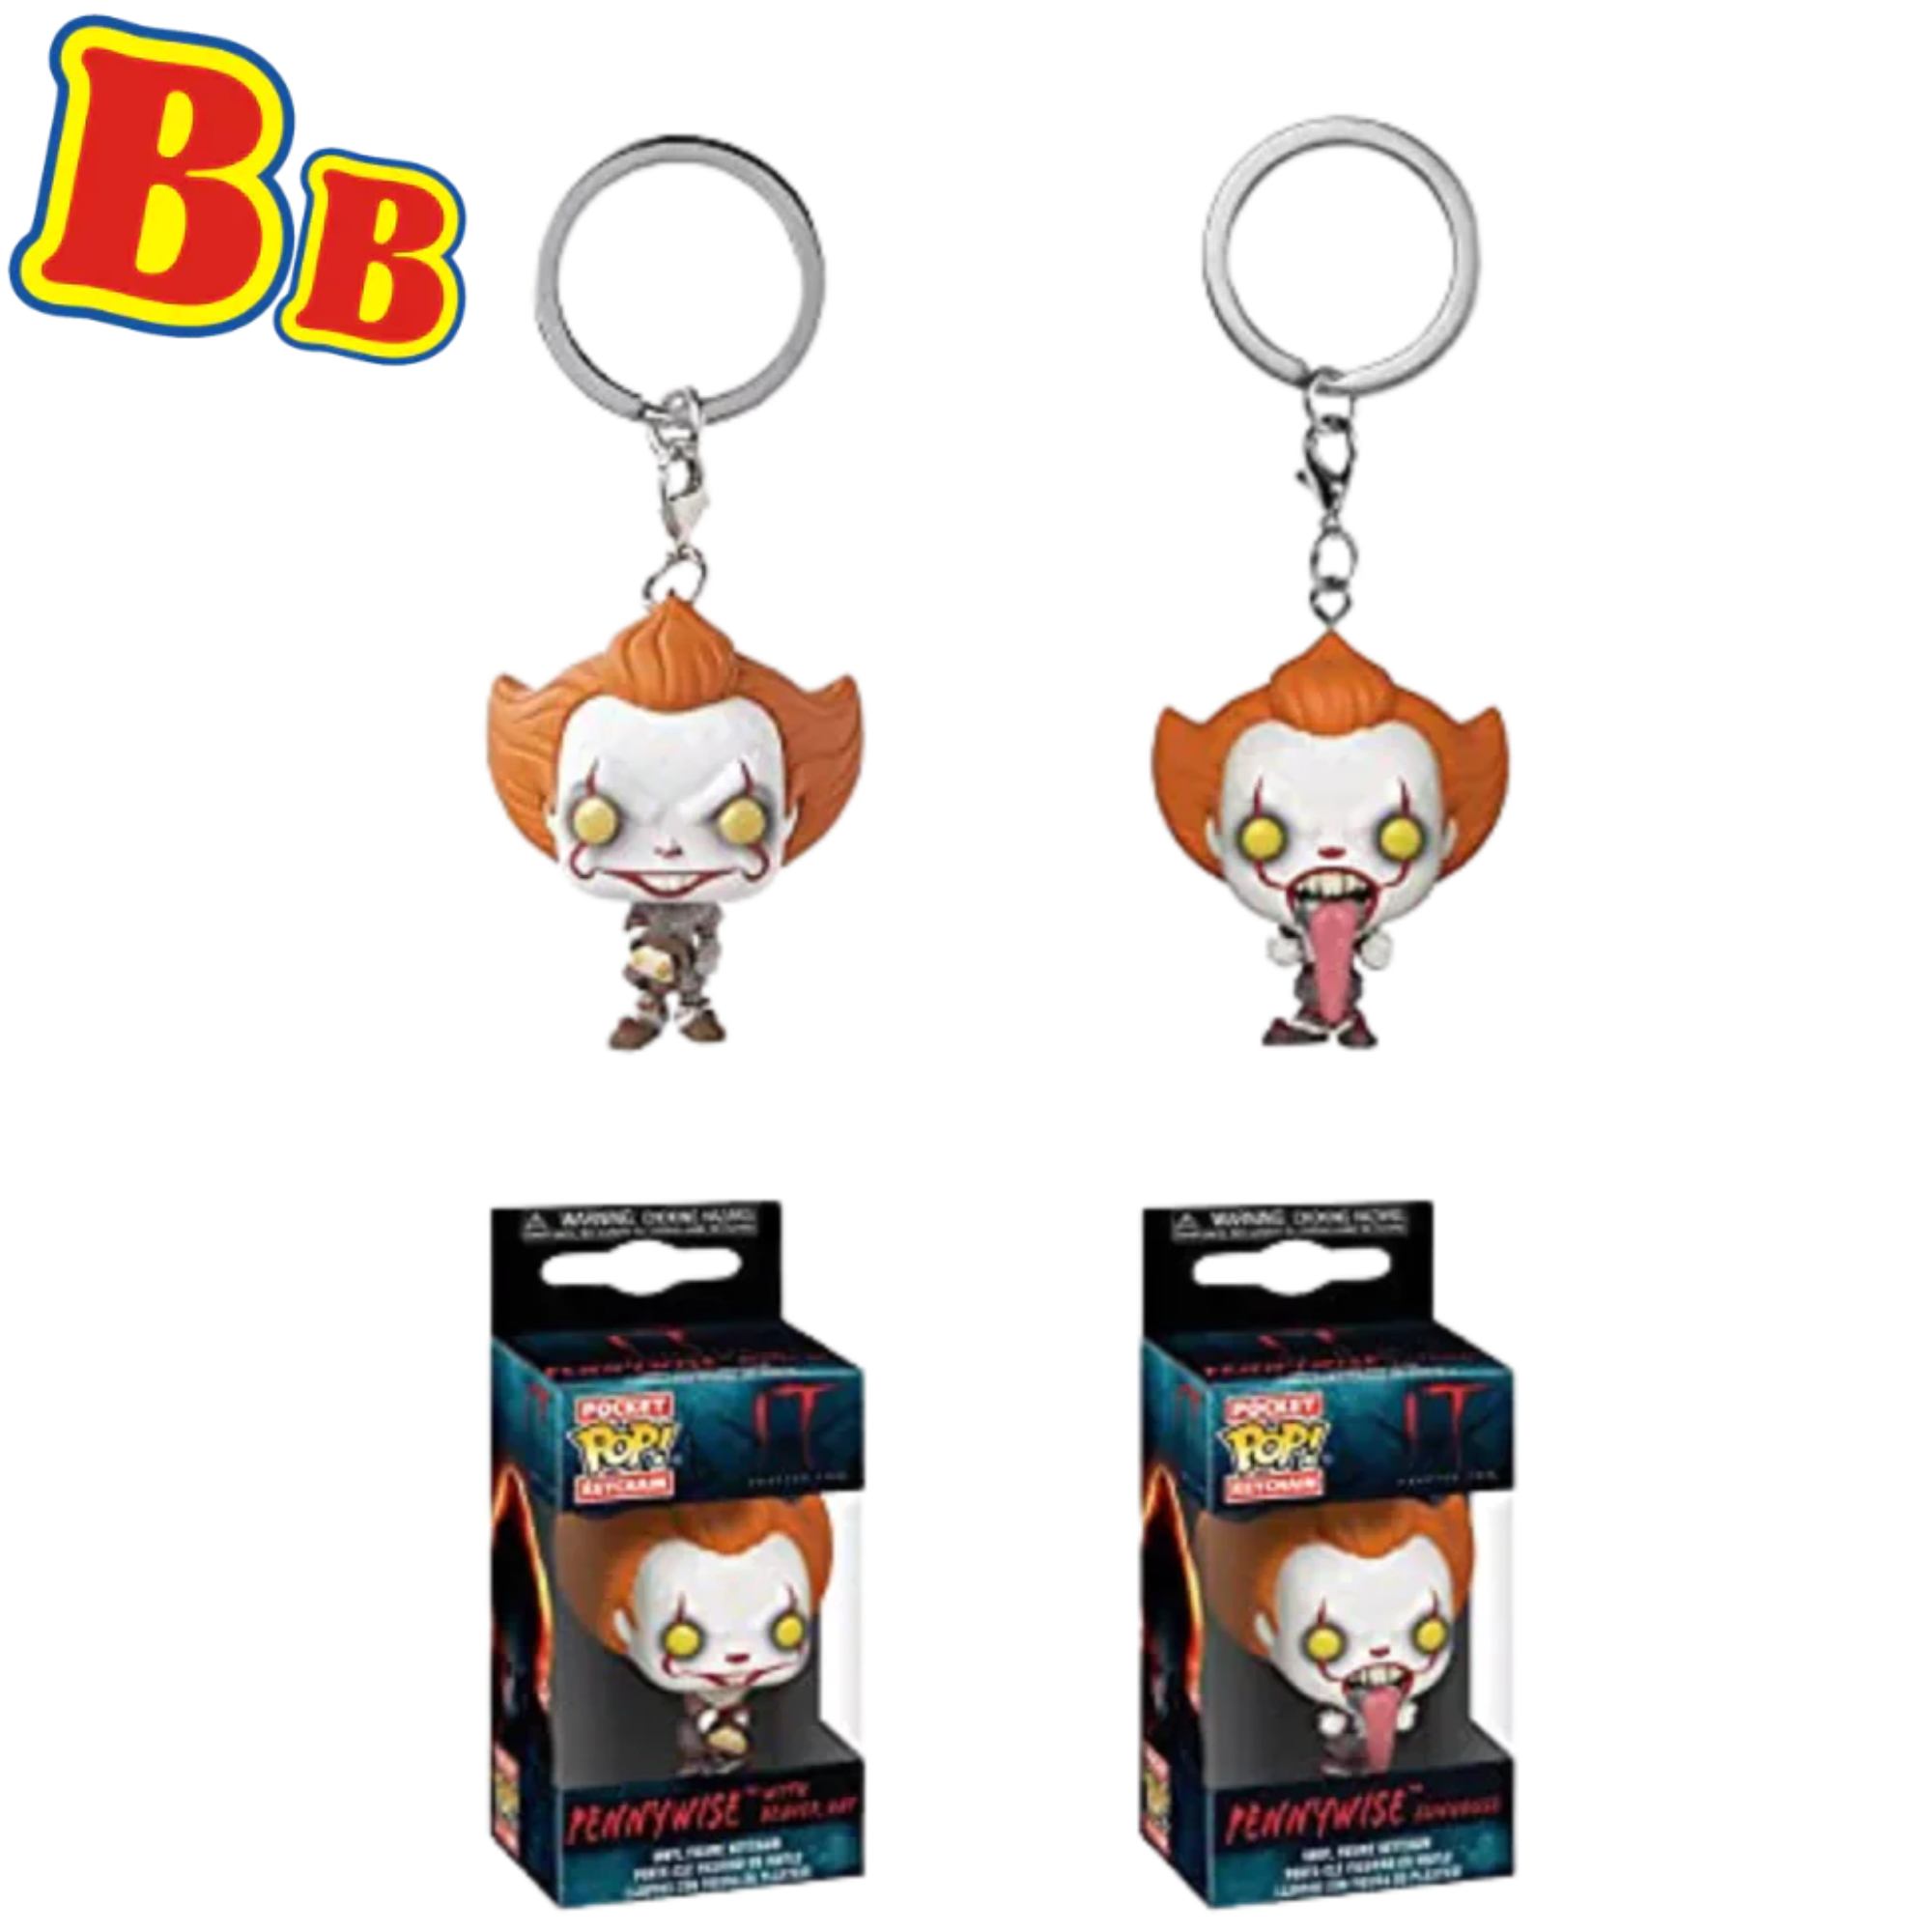 Funko POP! Keychain: Pennywise IT Chapter Two Vinyl Figures - Pennywise Funhouse & Beaver Hat Twin Pack